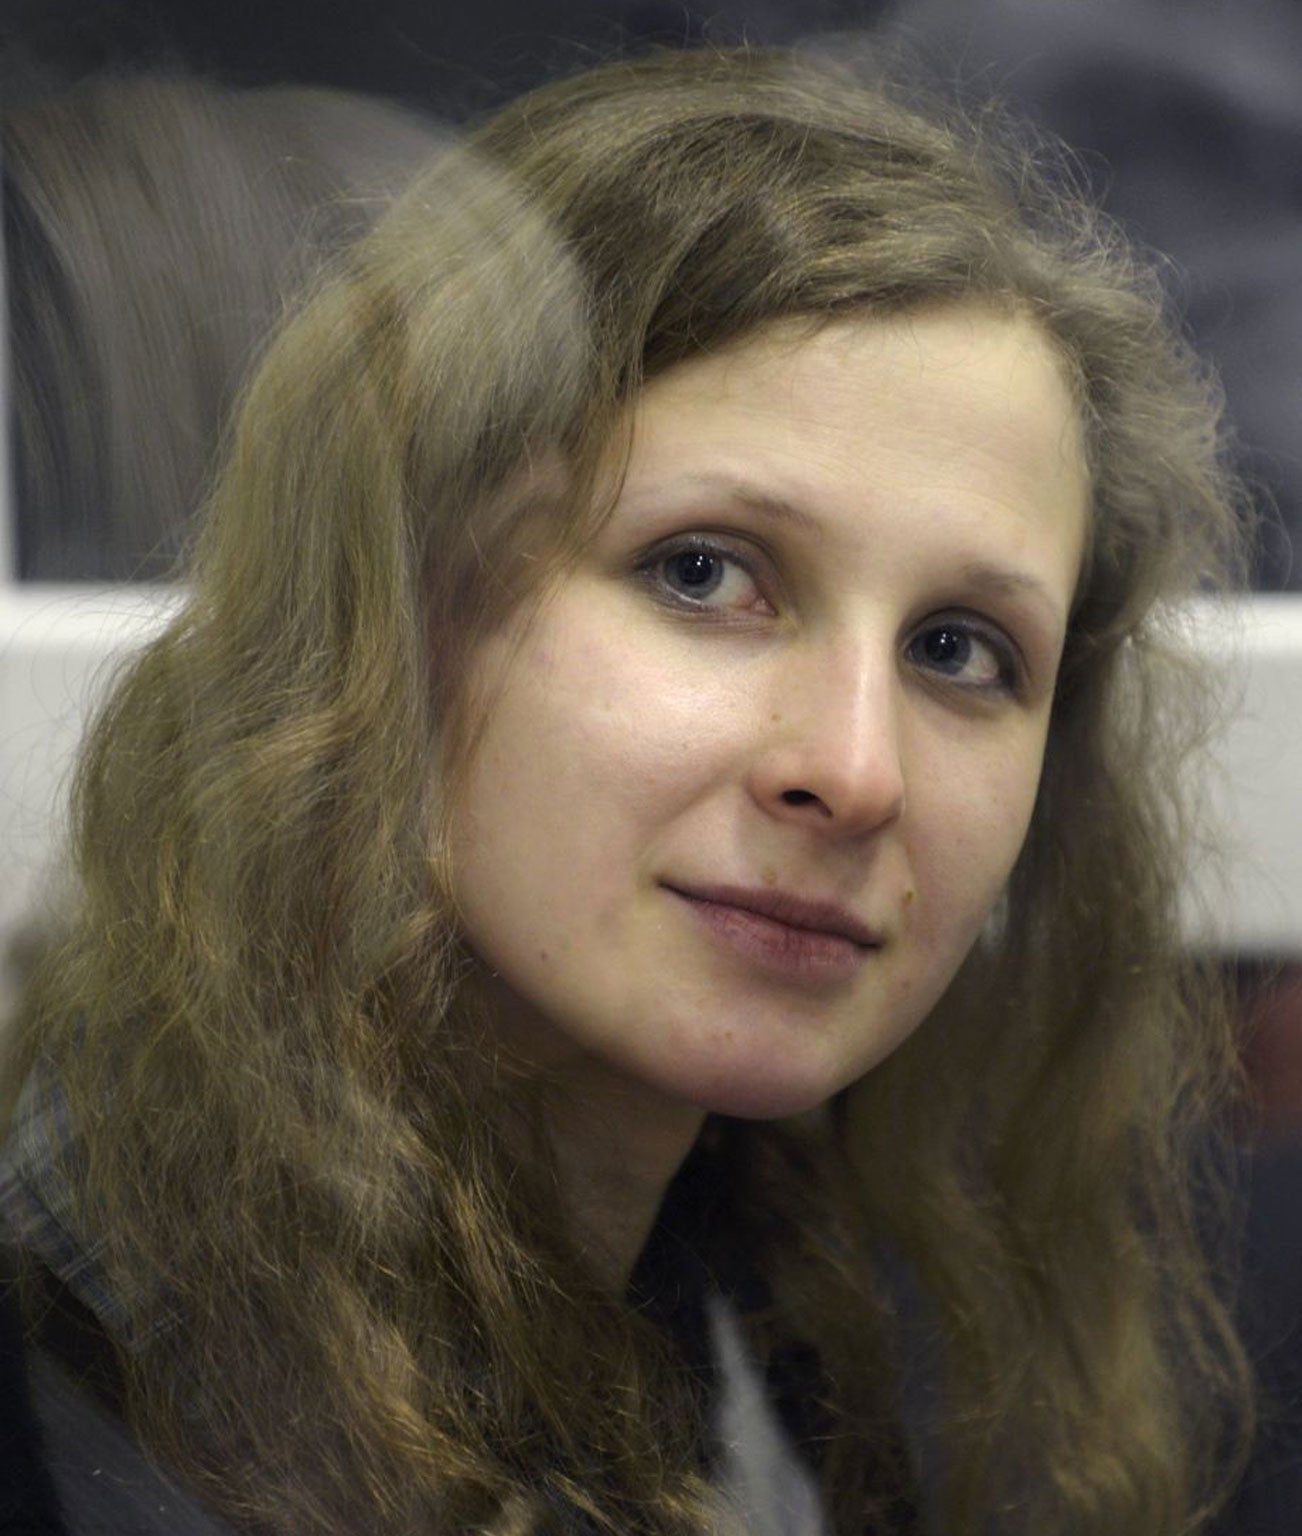 Maria Alekhina had complained that officials at her prison colony in the Ural Mountains attempted to turn fellow inmates against her with a security crackdown.